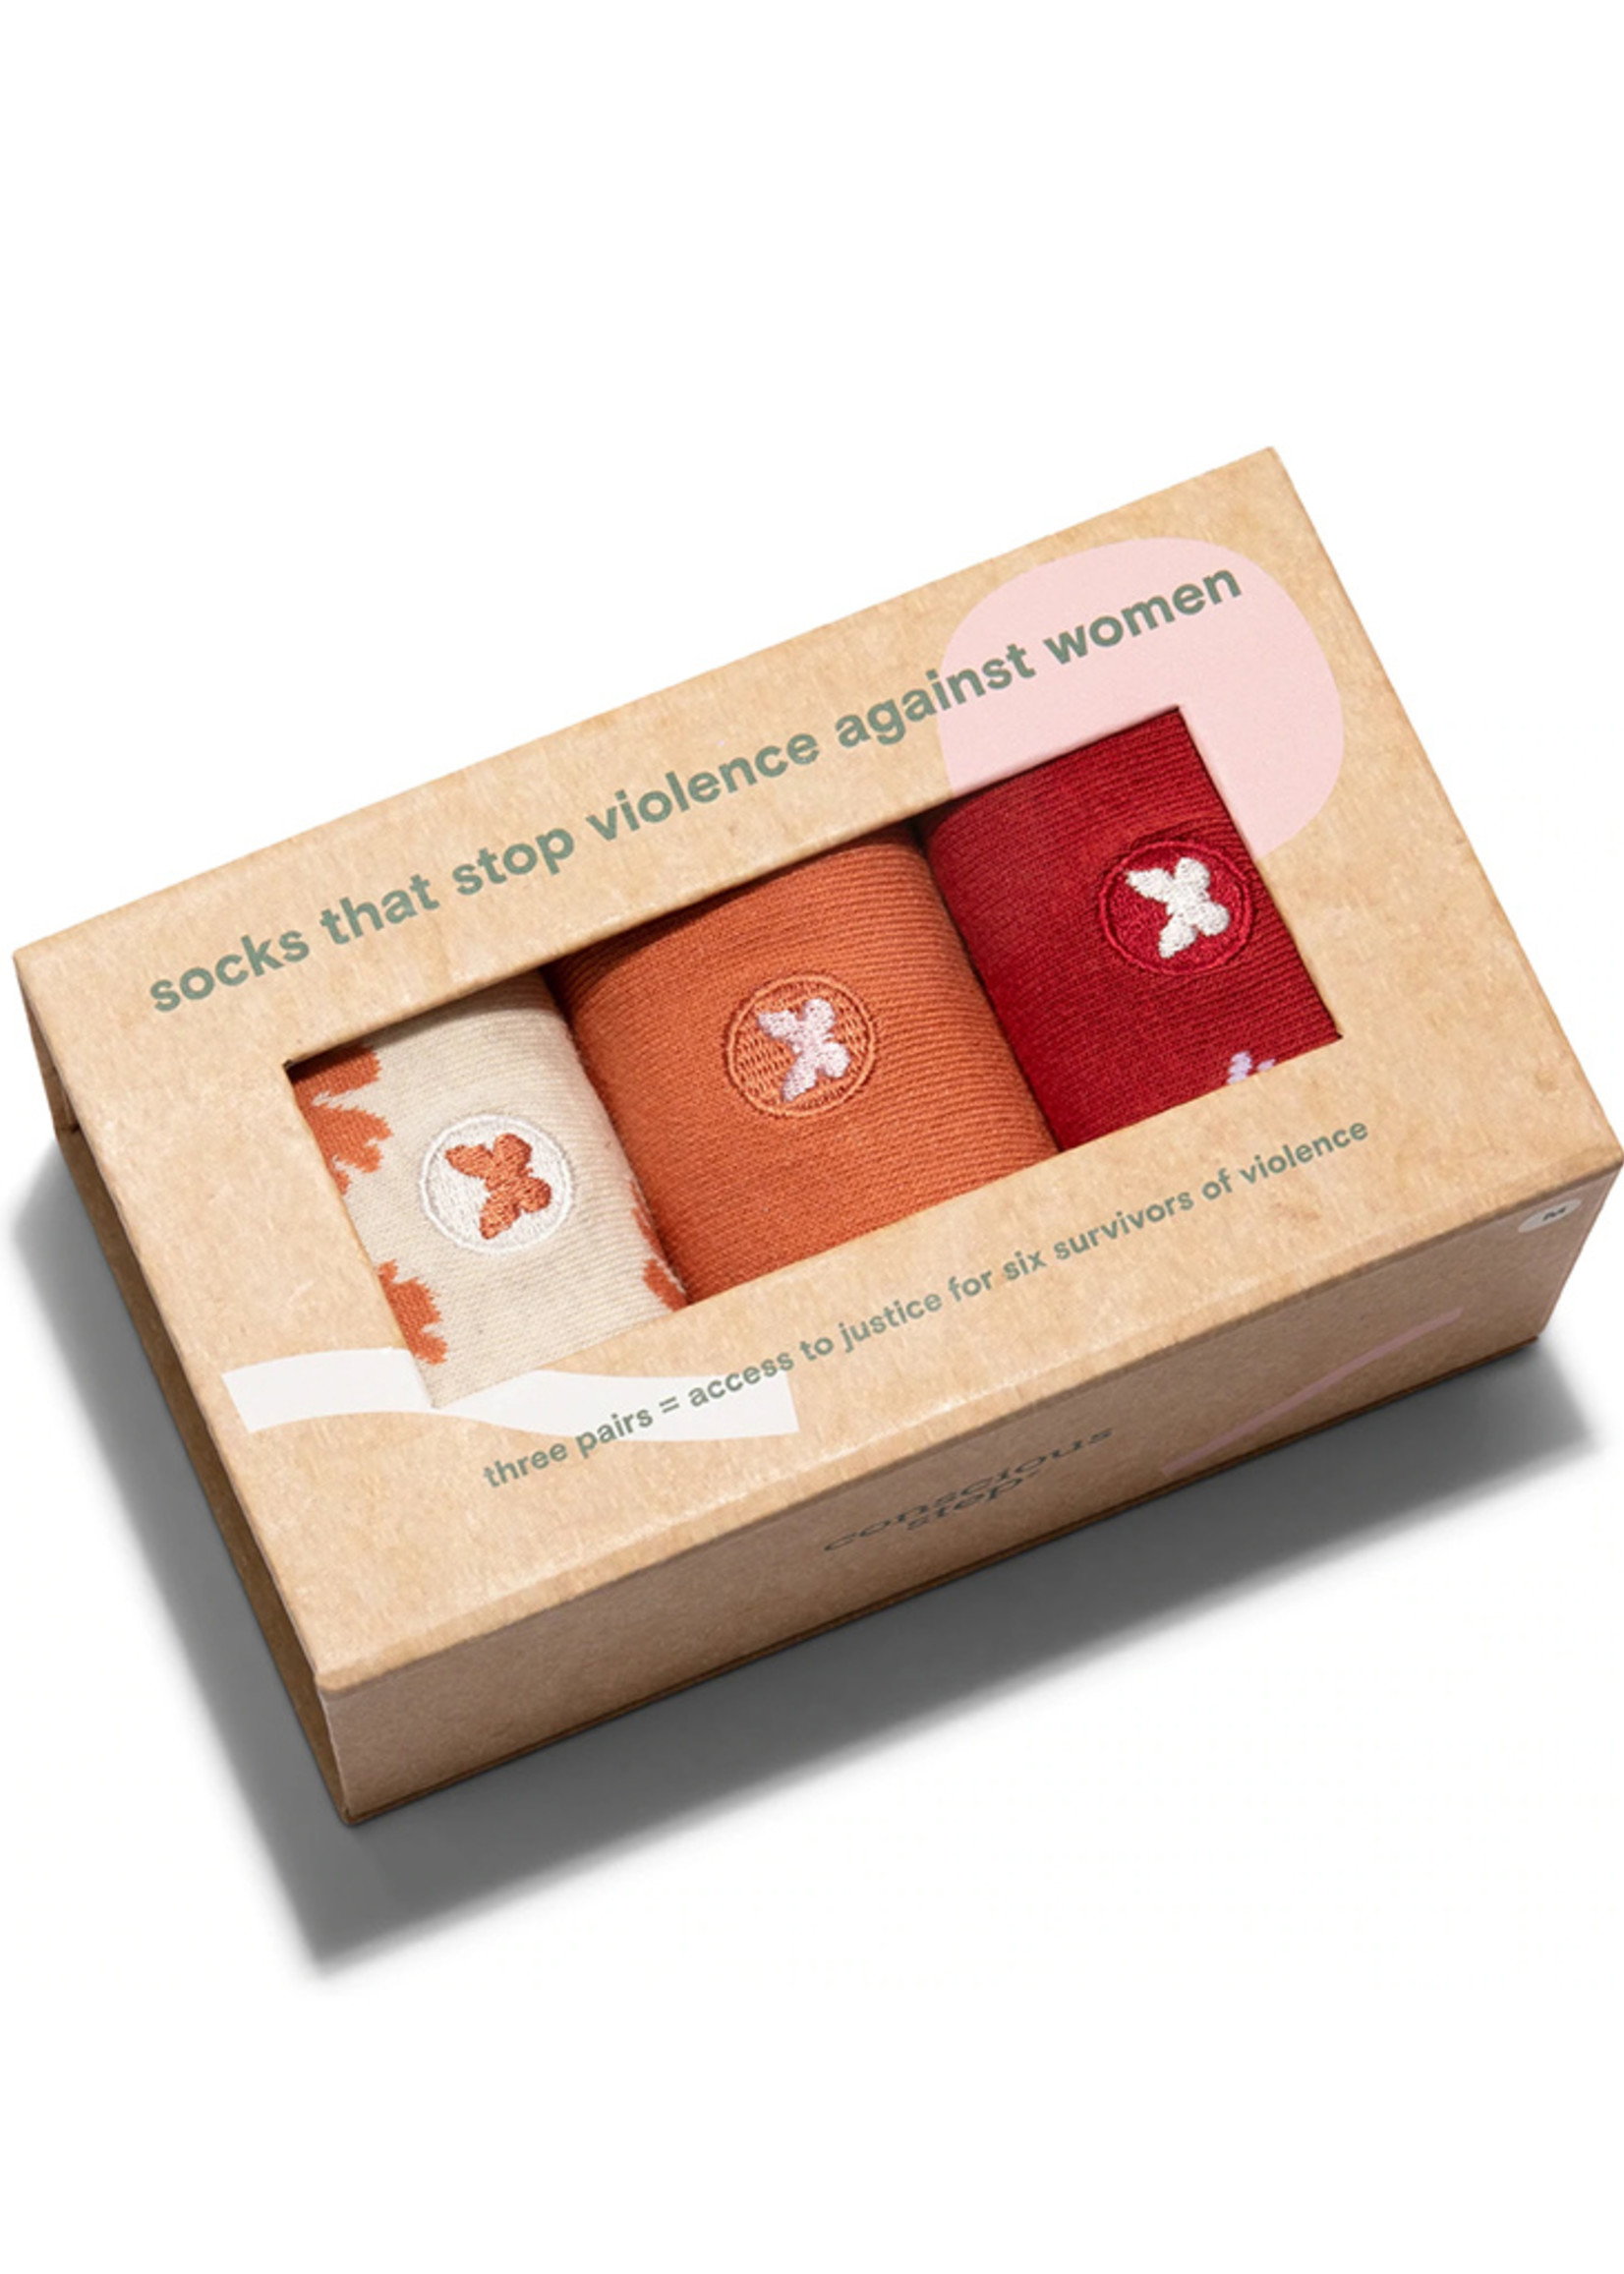 Conscious Step Women's Box of Socks That Stop Violence Against Women